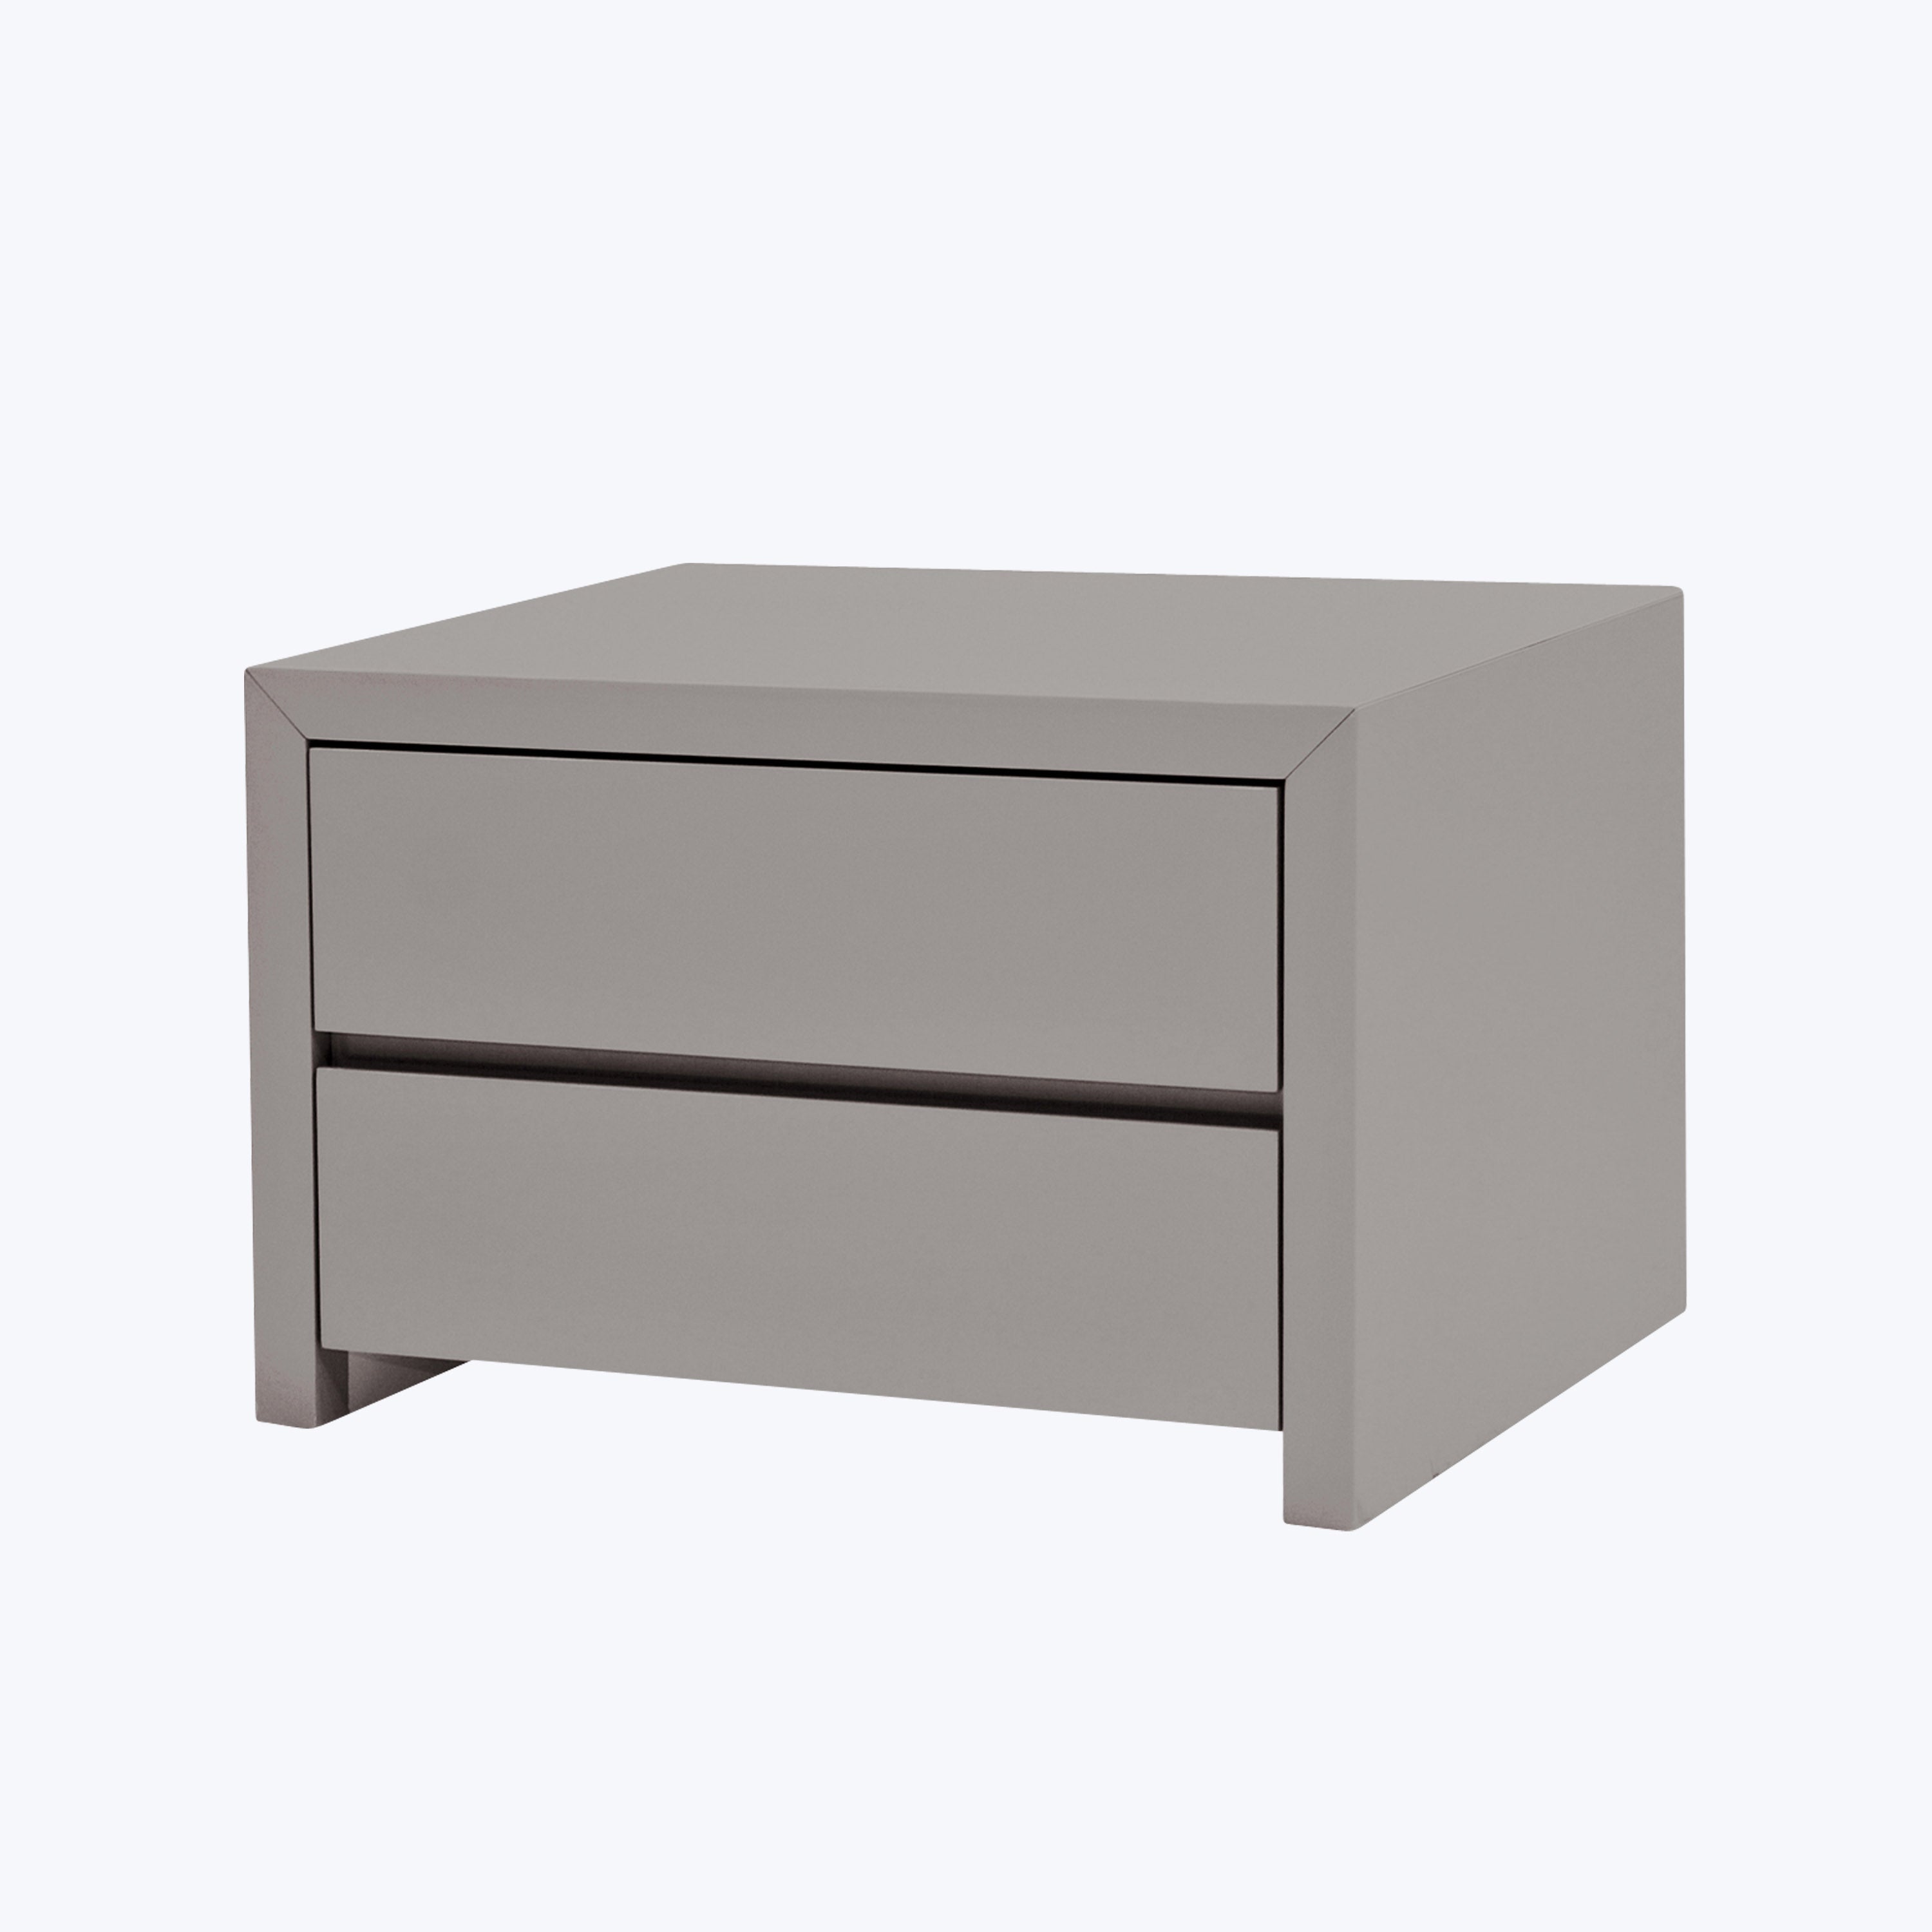 Stowe Lacquer Nightstand Stone / 2-Drawer